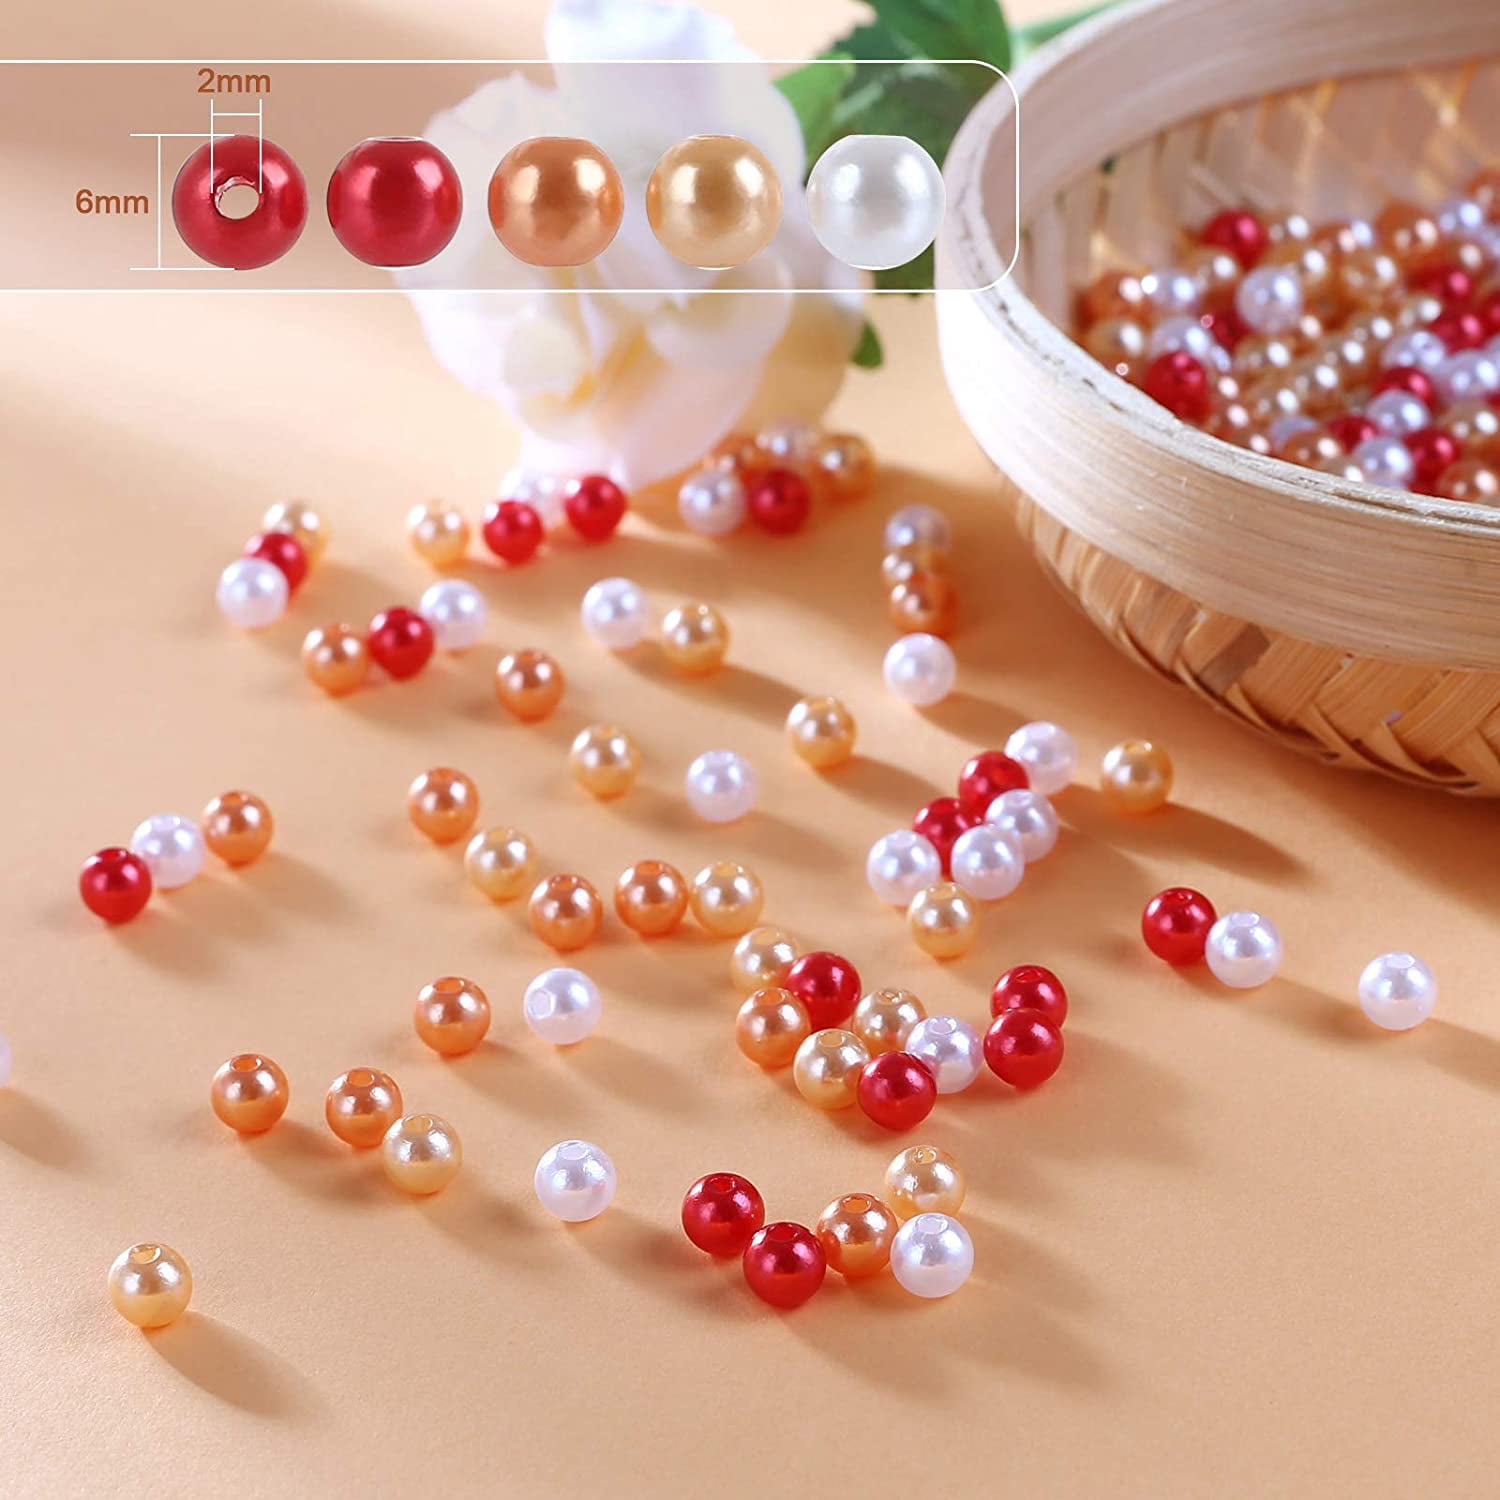 Incraftables Pearl Beads for Jewelry Making 1700pcs (24 Colors). 6mm Round Pearl  Beads for Bracelets Making & Crafting. Assorted Pearls for crafts for Kids  & Adults with Silver Wire, String & Clasps